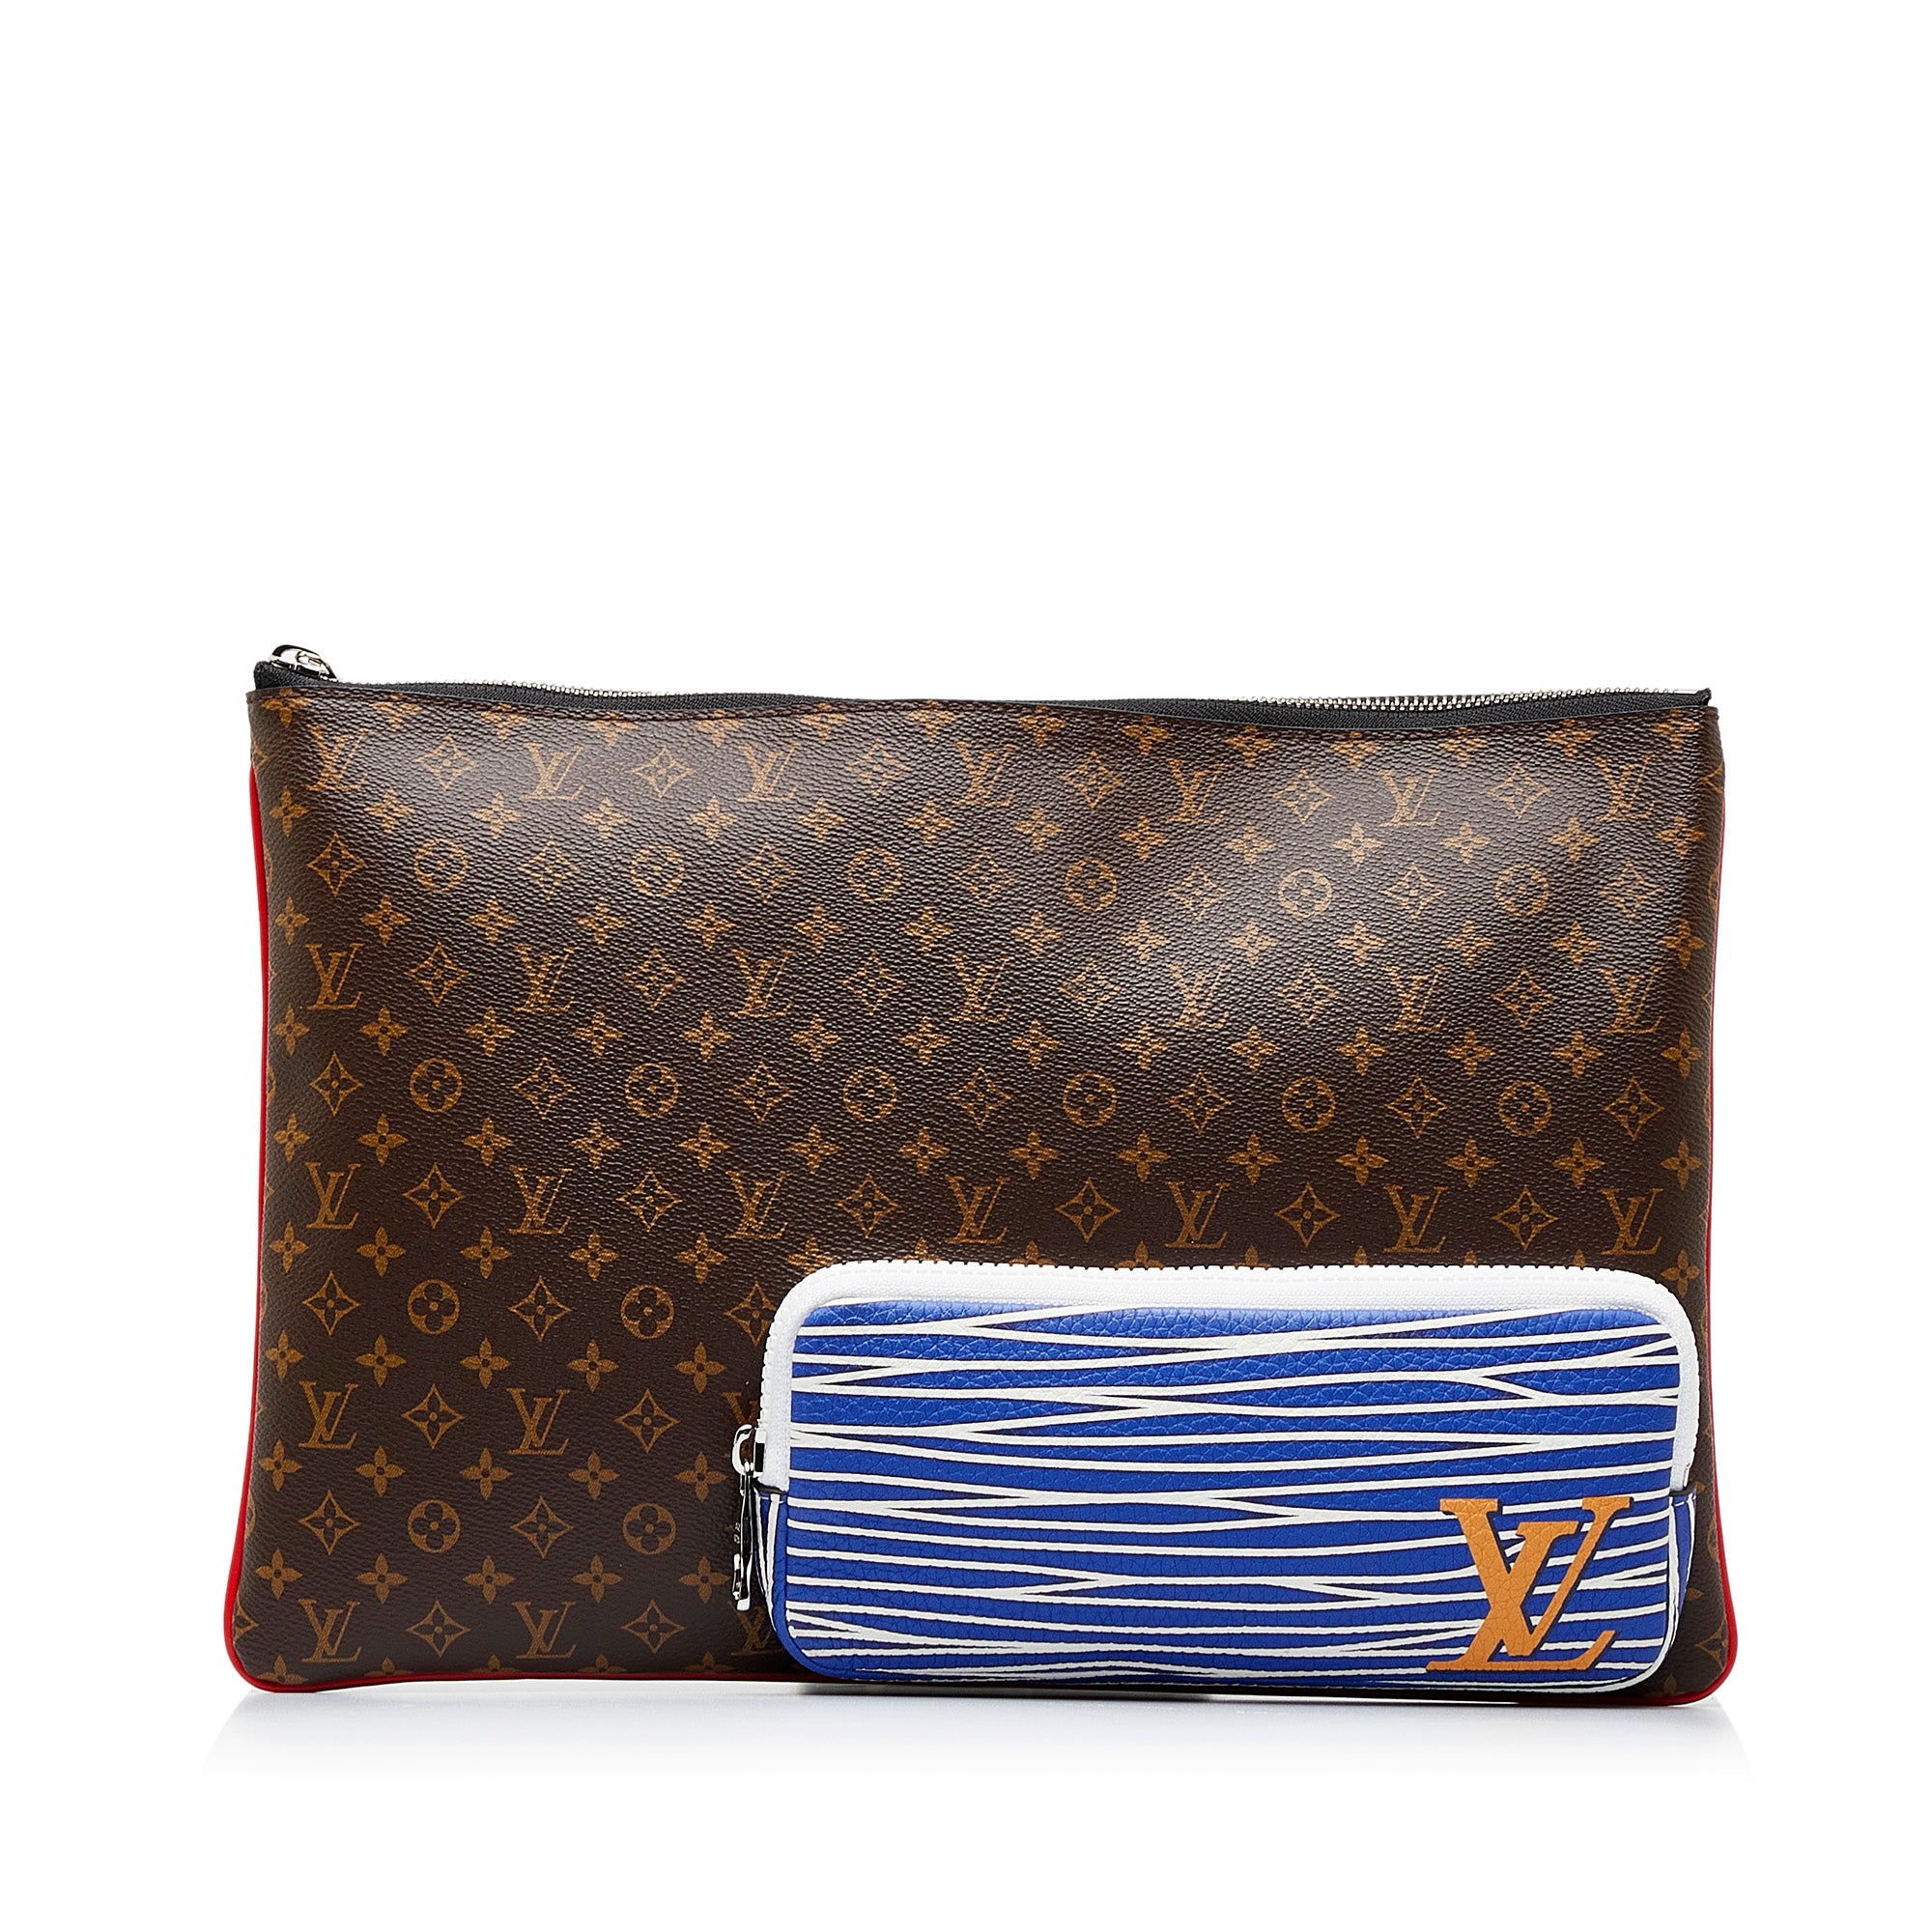 Louis Vuitton - Authenticated Spontini Handbag - Cloth Brown for Women, Very Good Condition